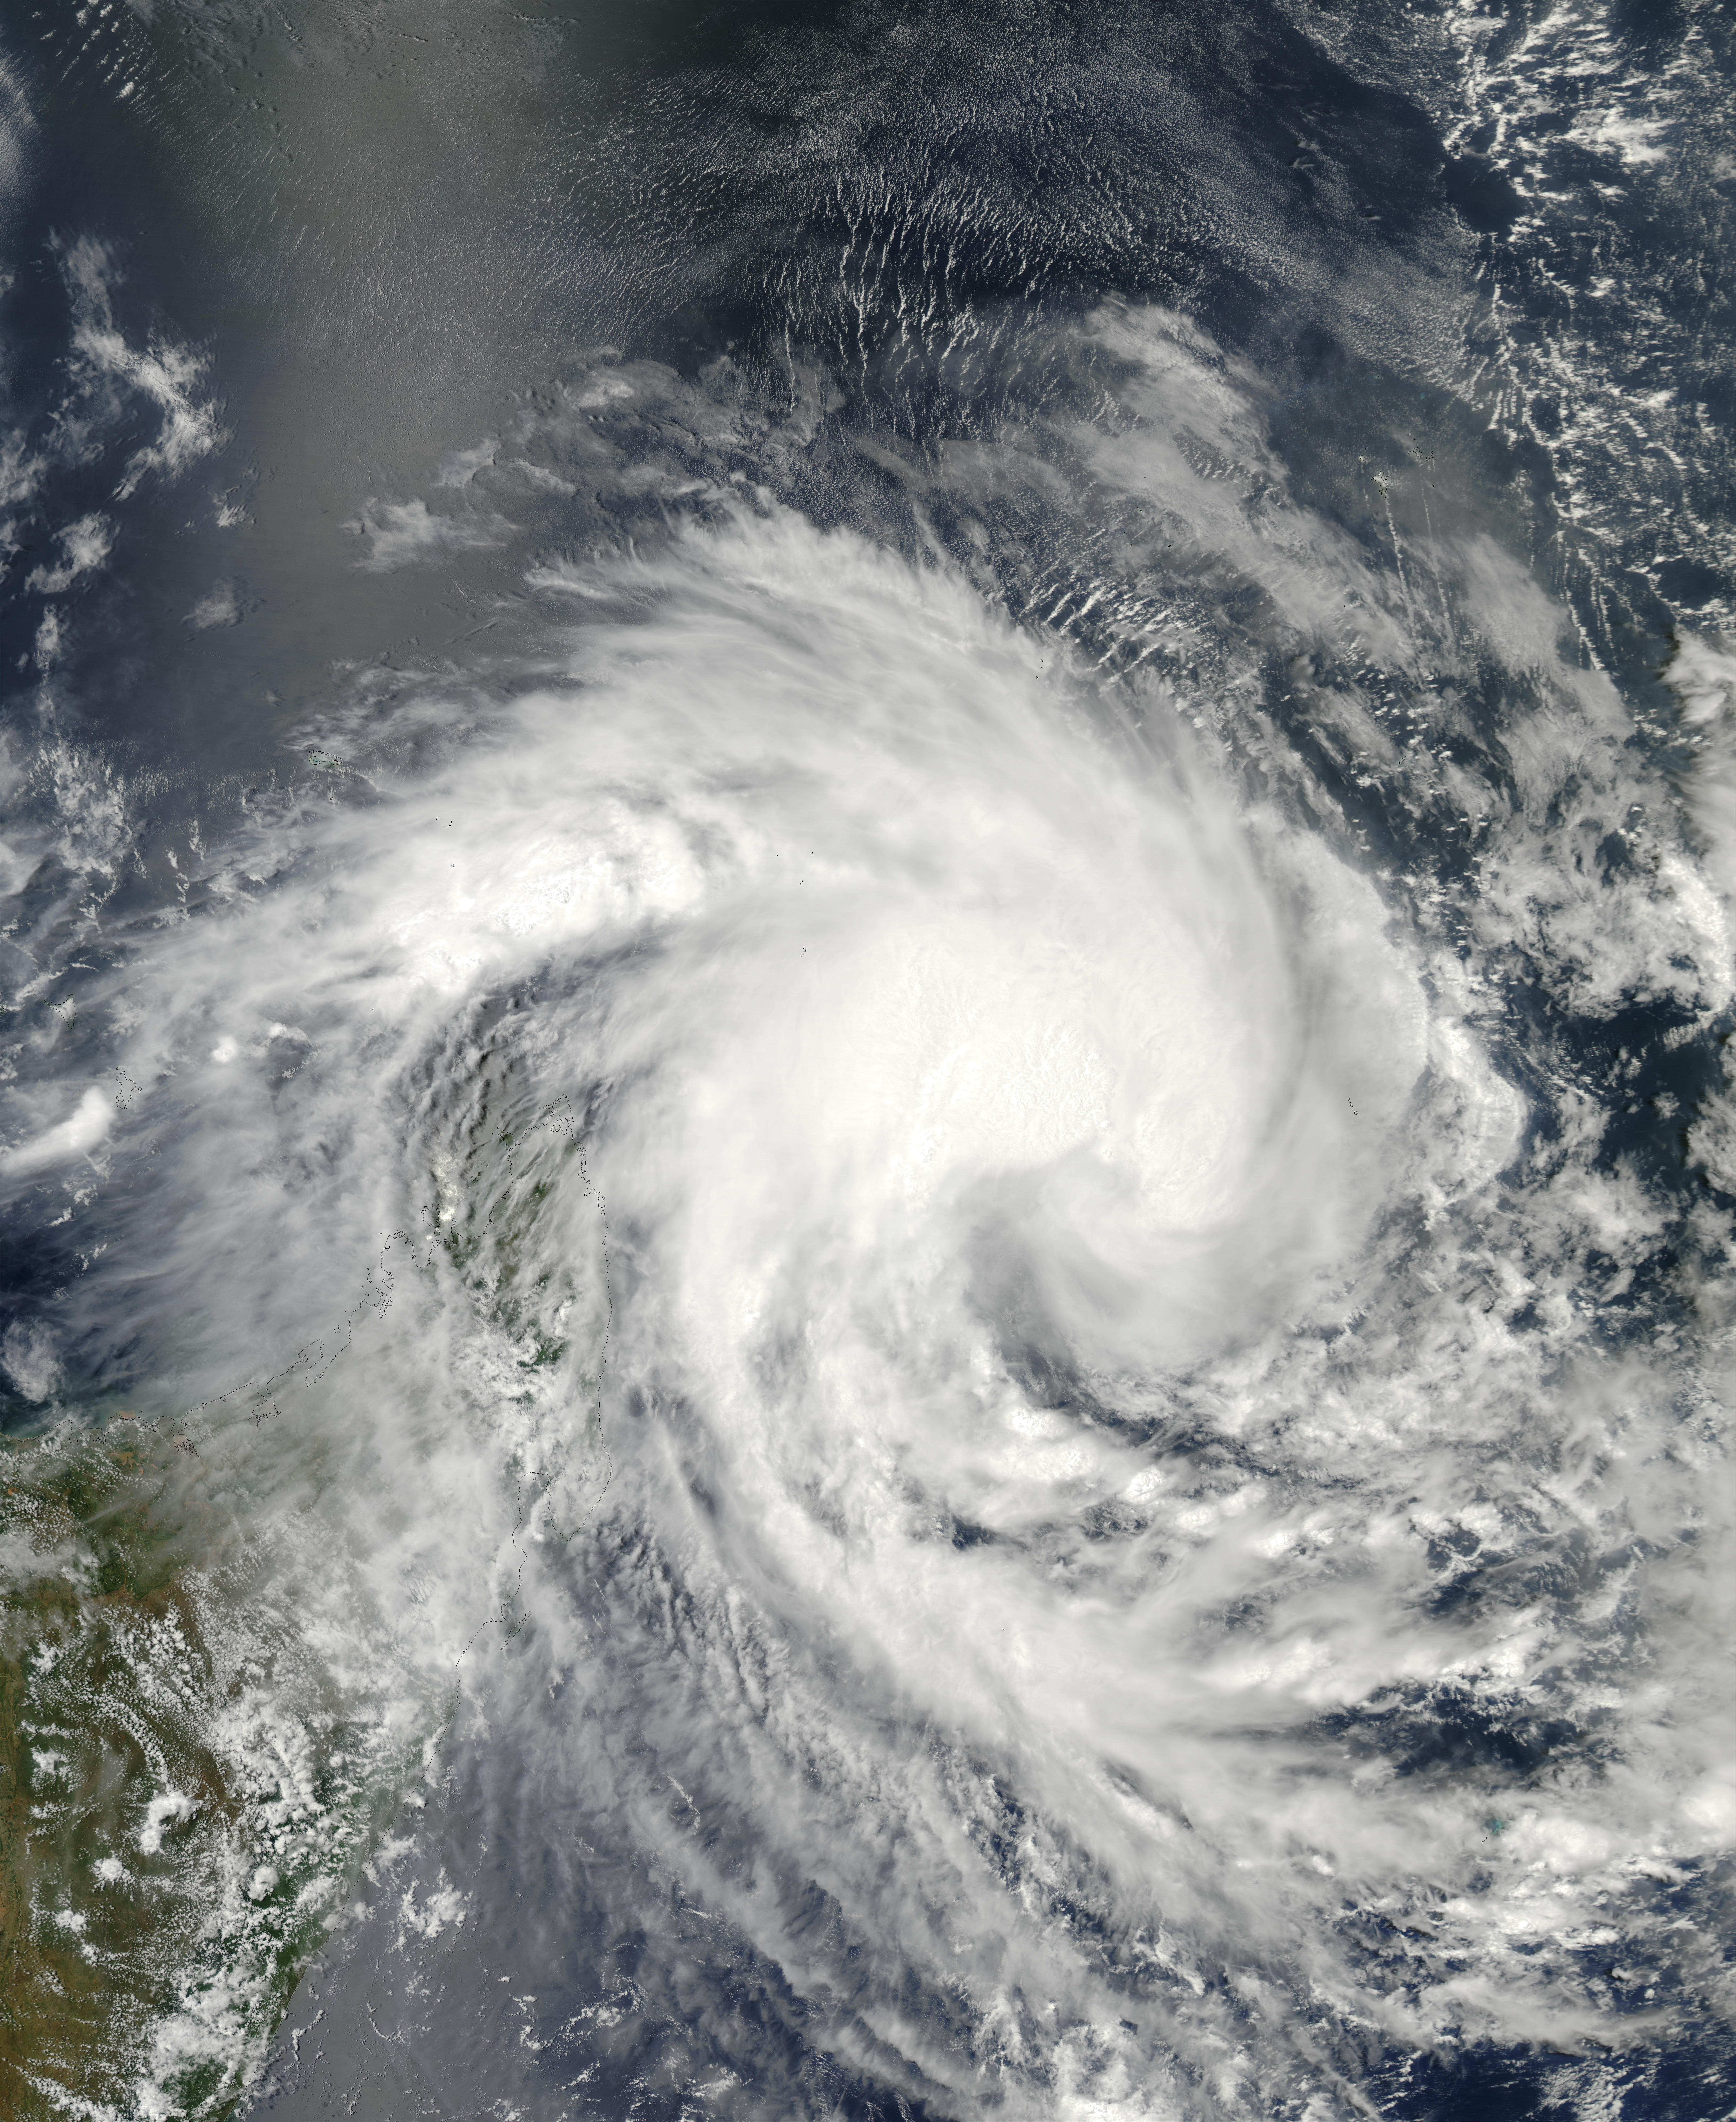 Tropical Cyclone 16S off Madagascar, Indian Ocean - related image preview